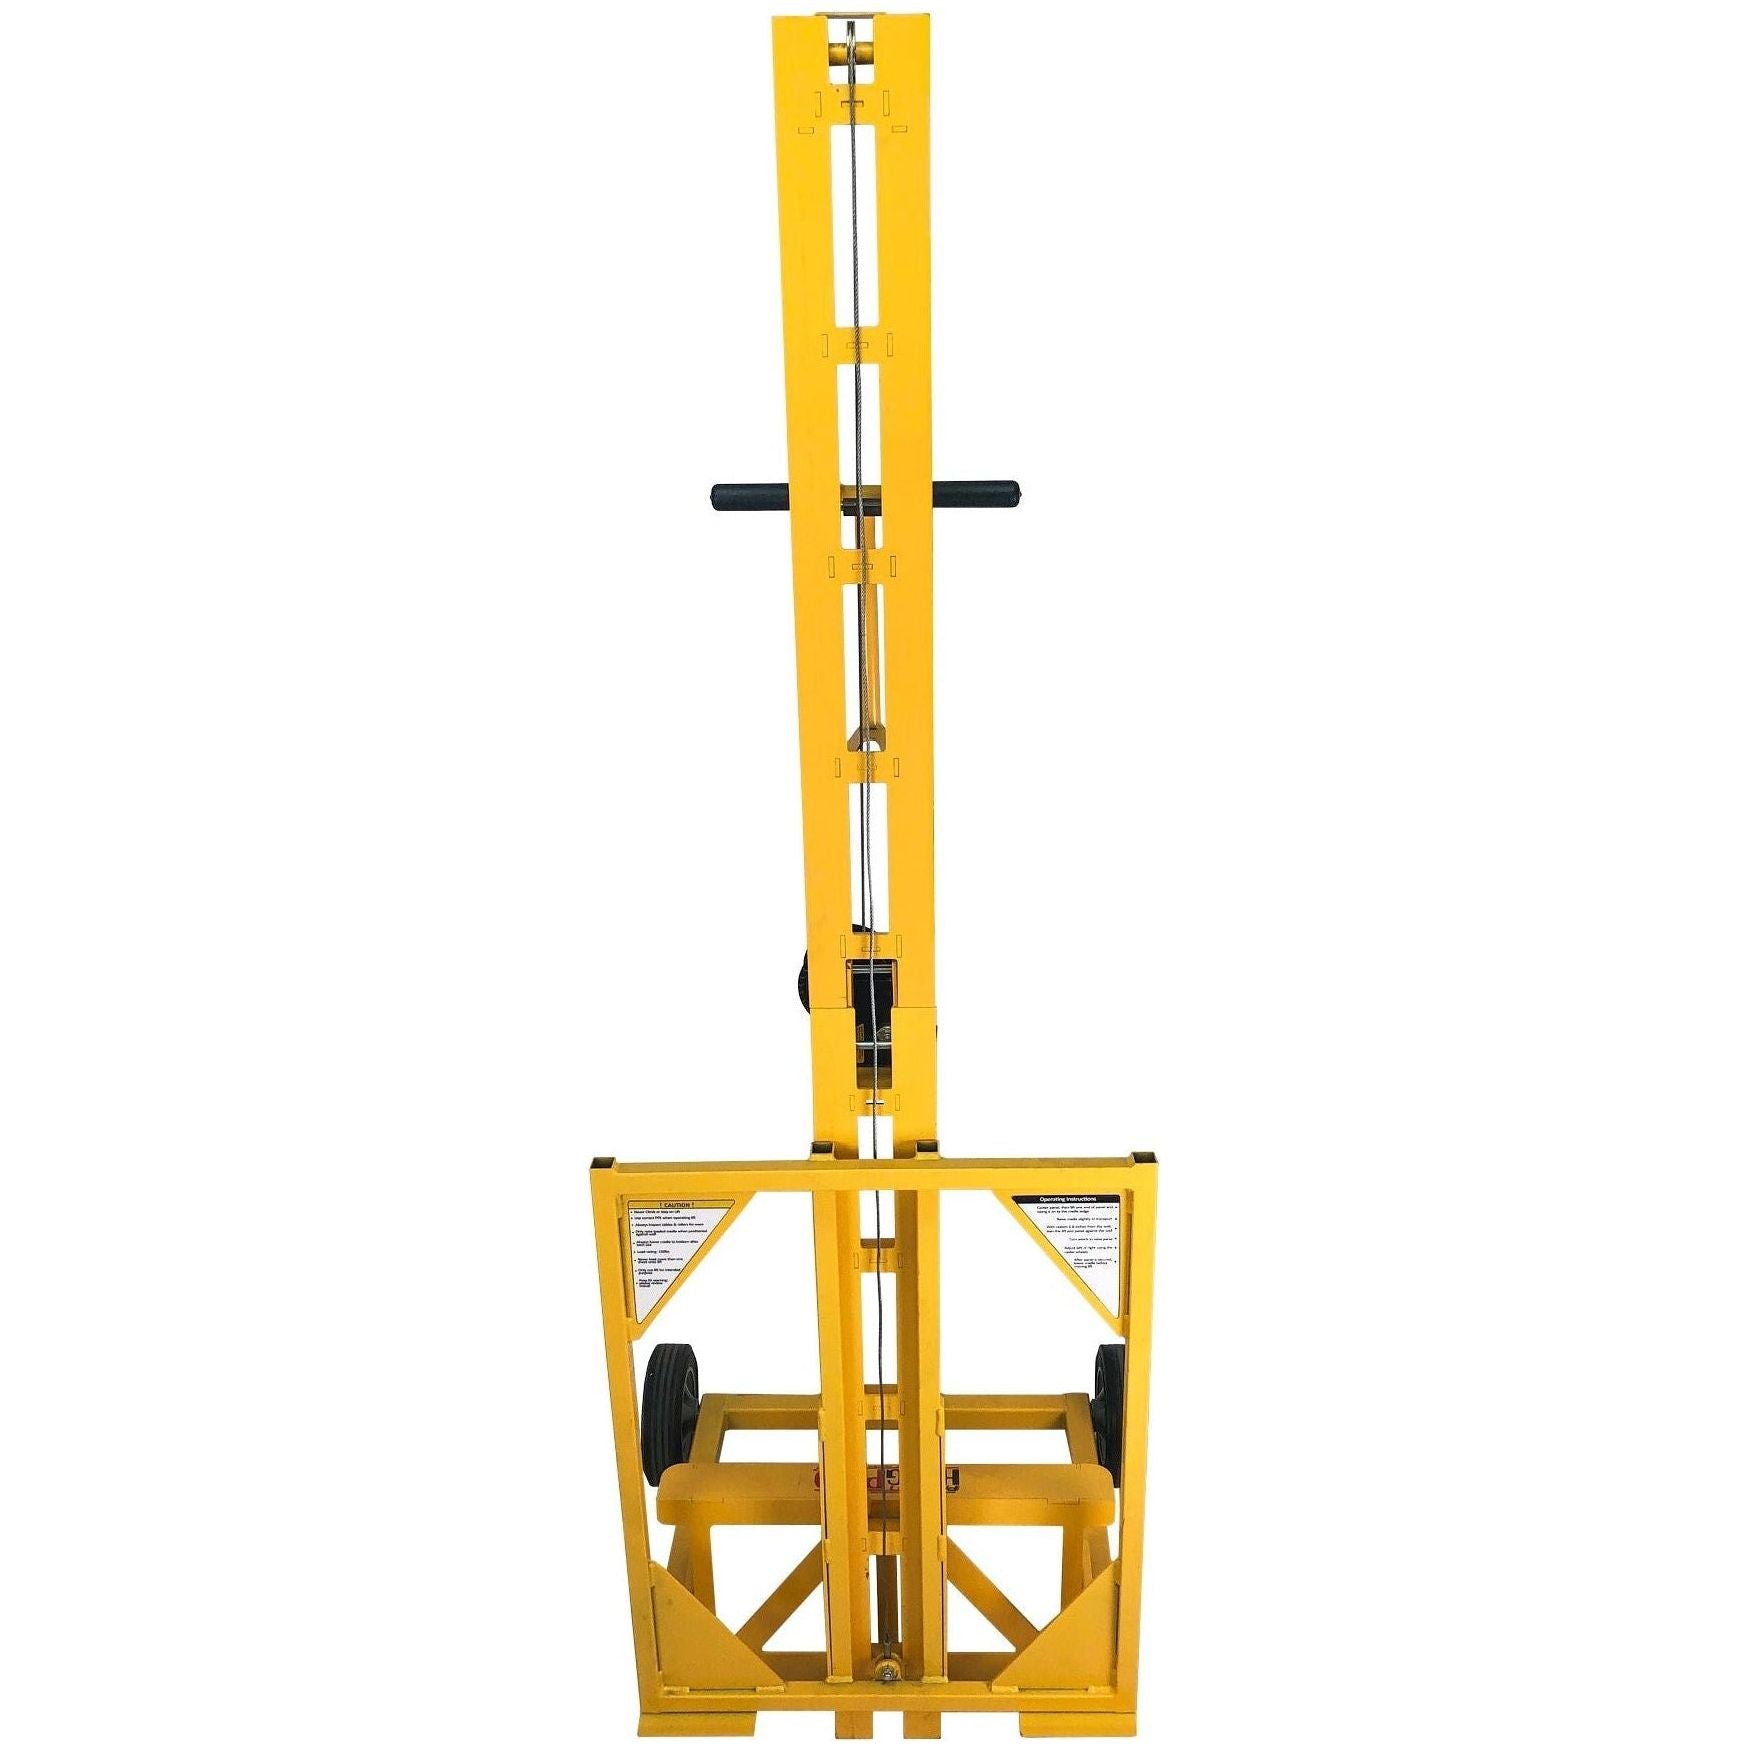 Panellift® Hangpro® Drywall Lift for Walls Model 150 - Paragon Pro Manufacturing Solutions Inc.